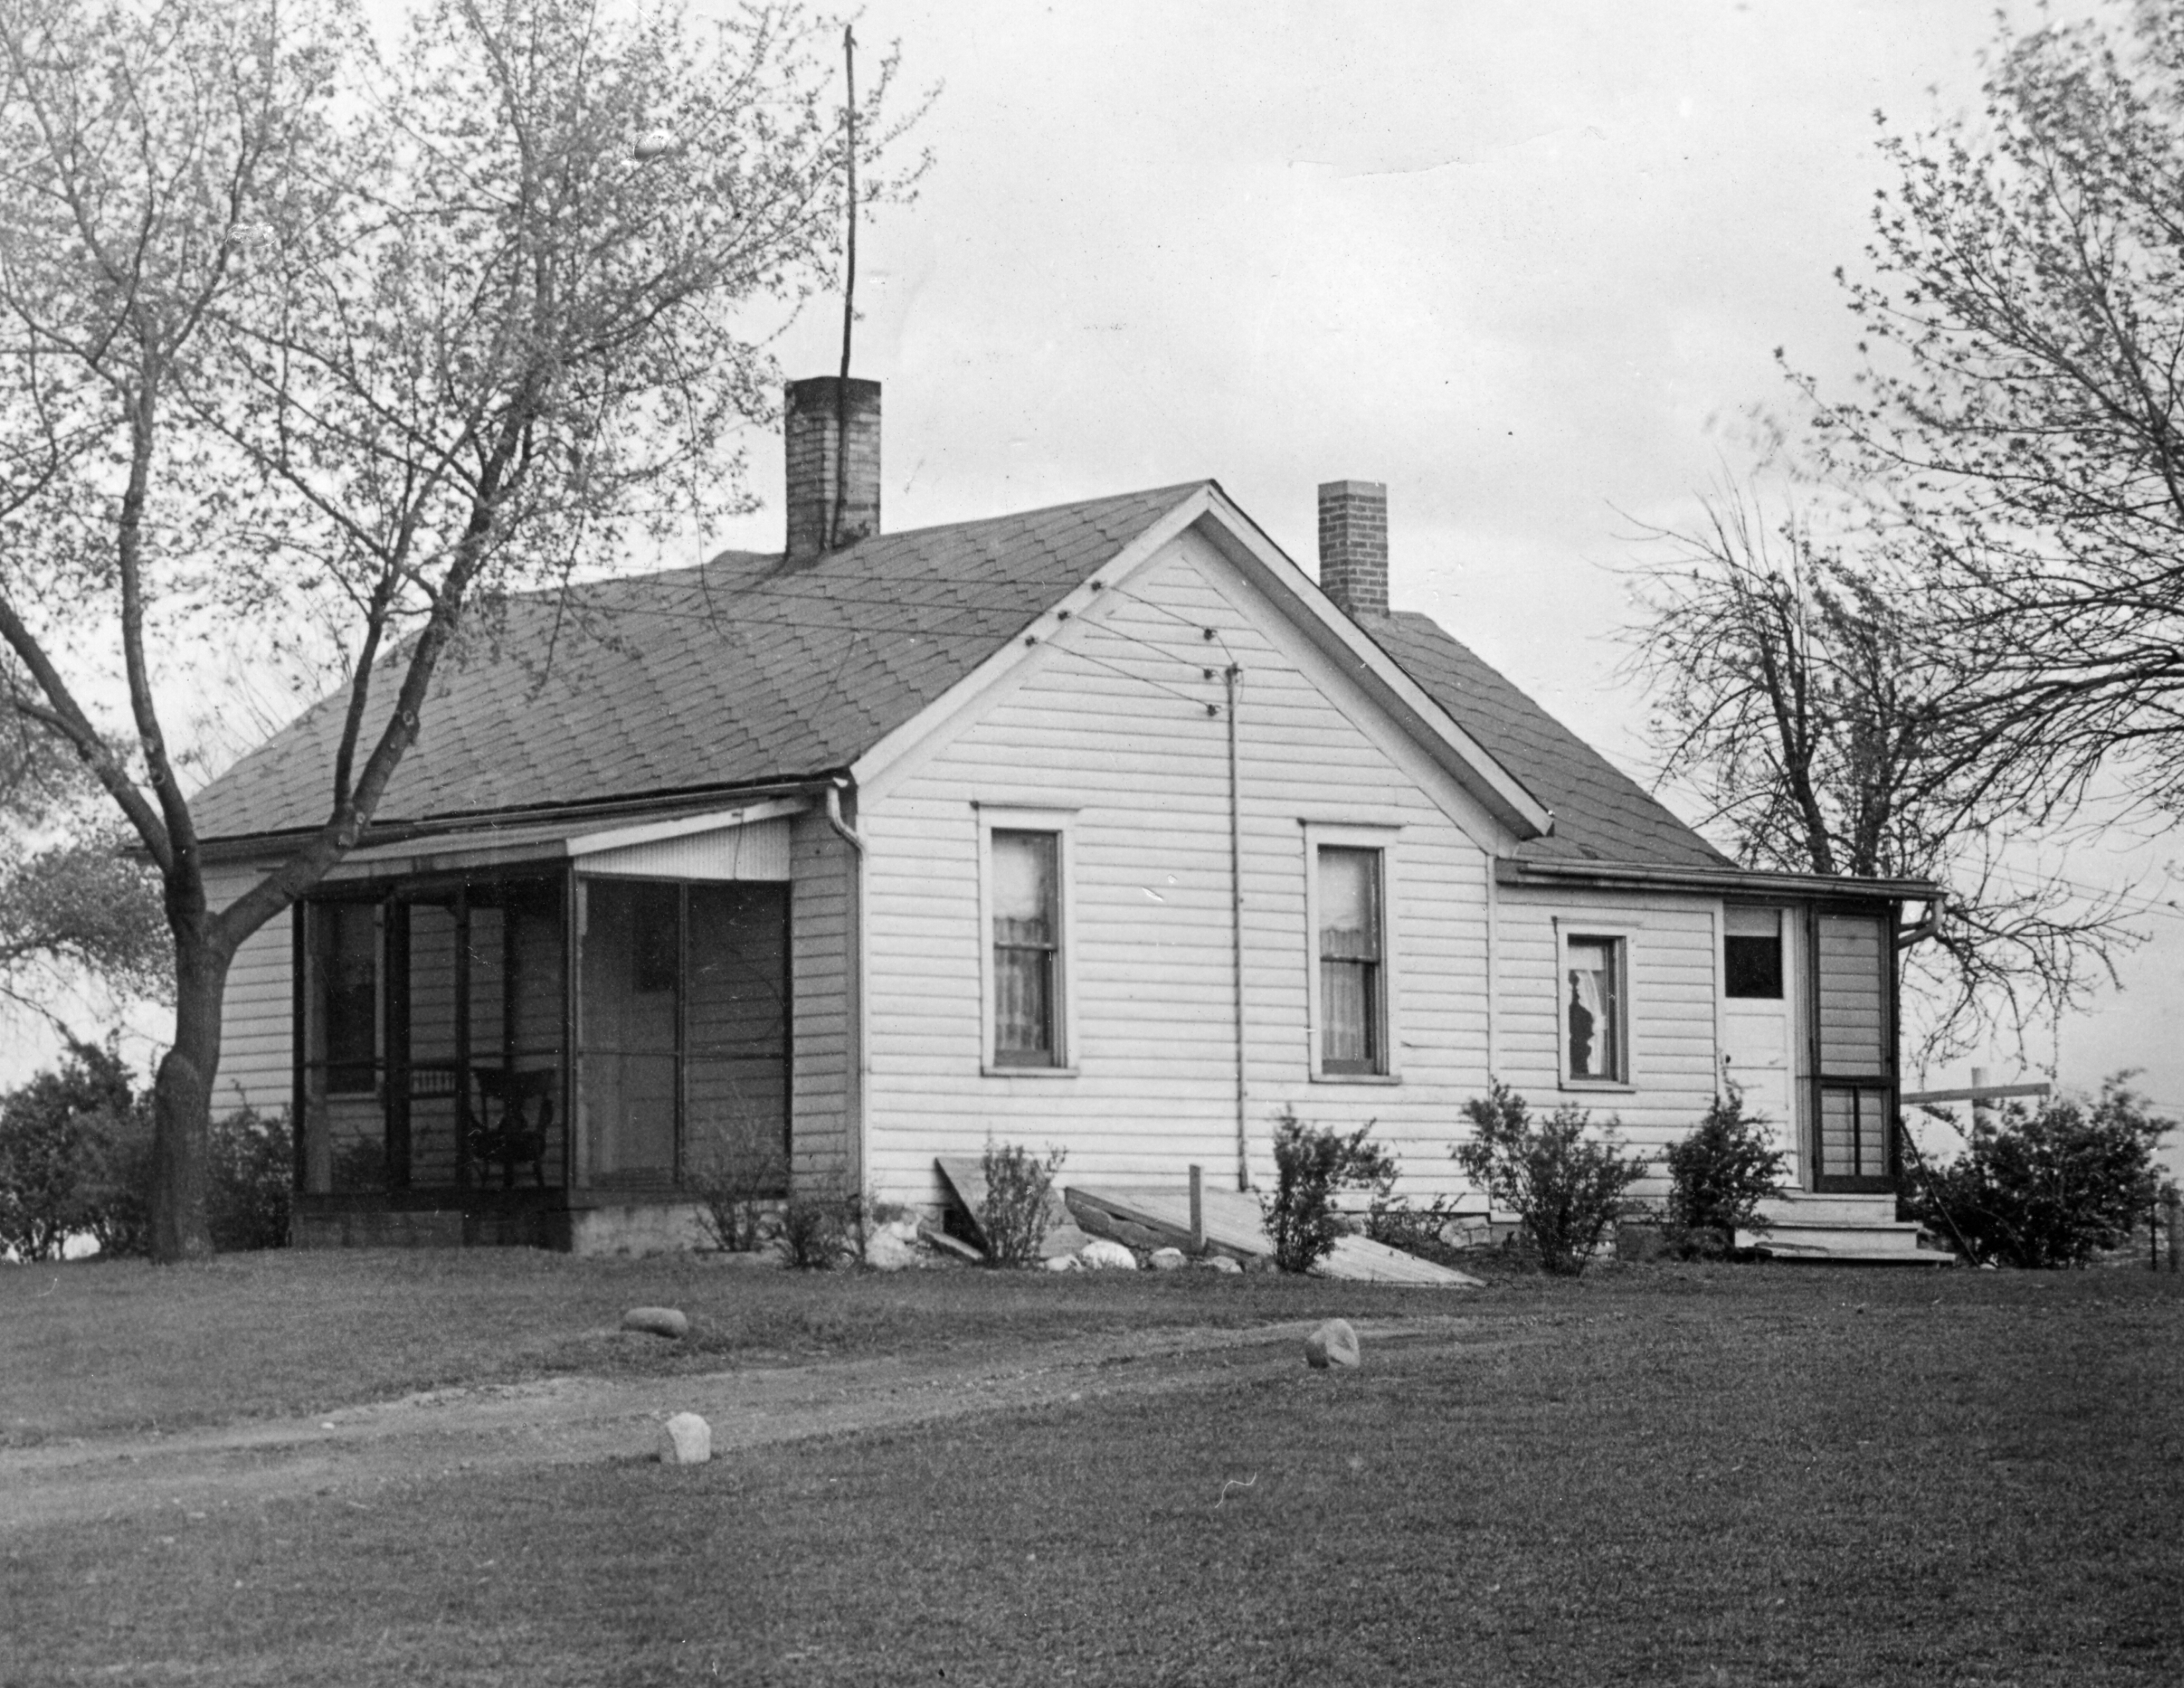 Photograph of the Campbell family farm home